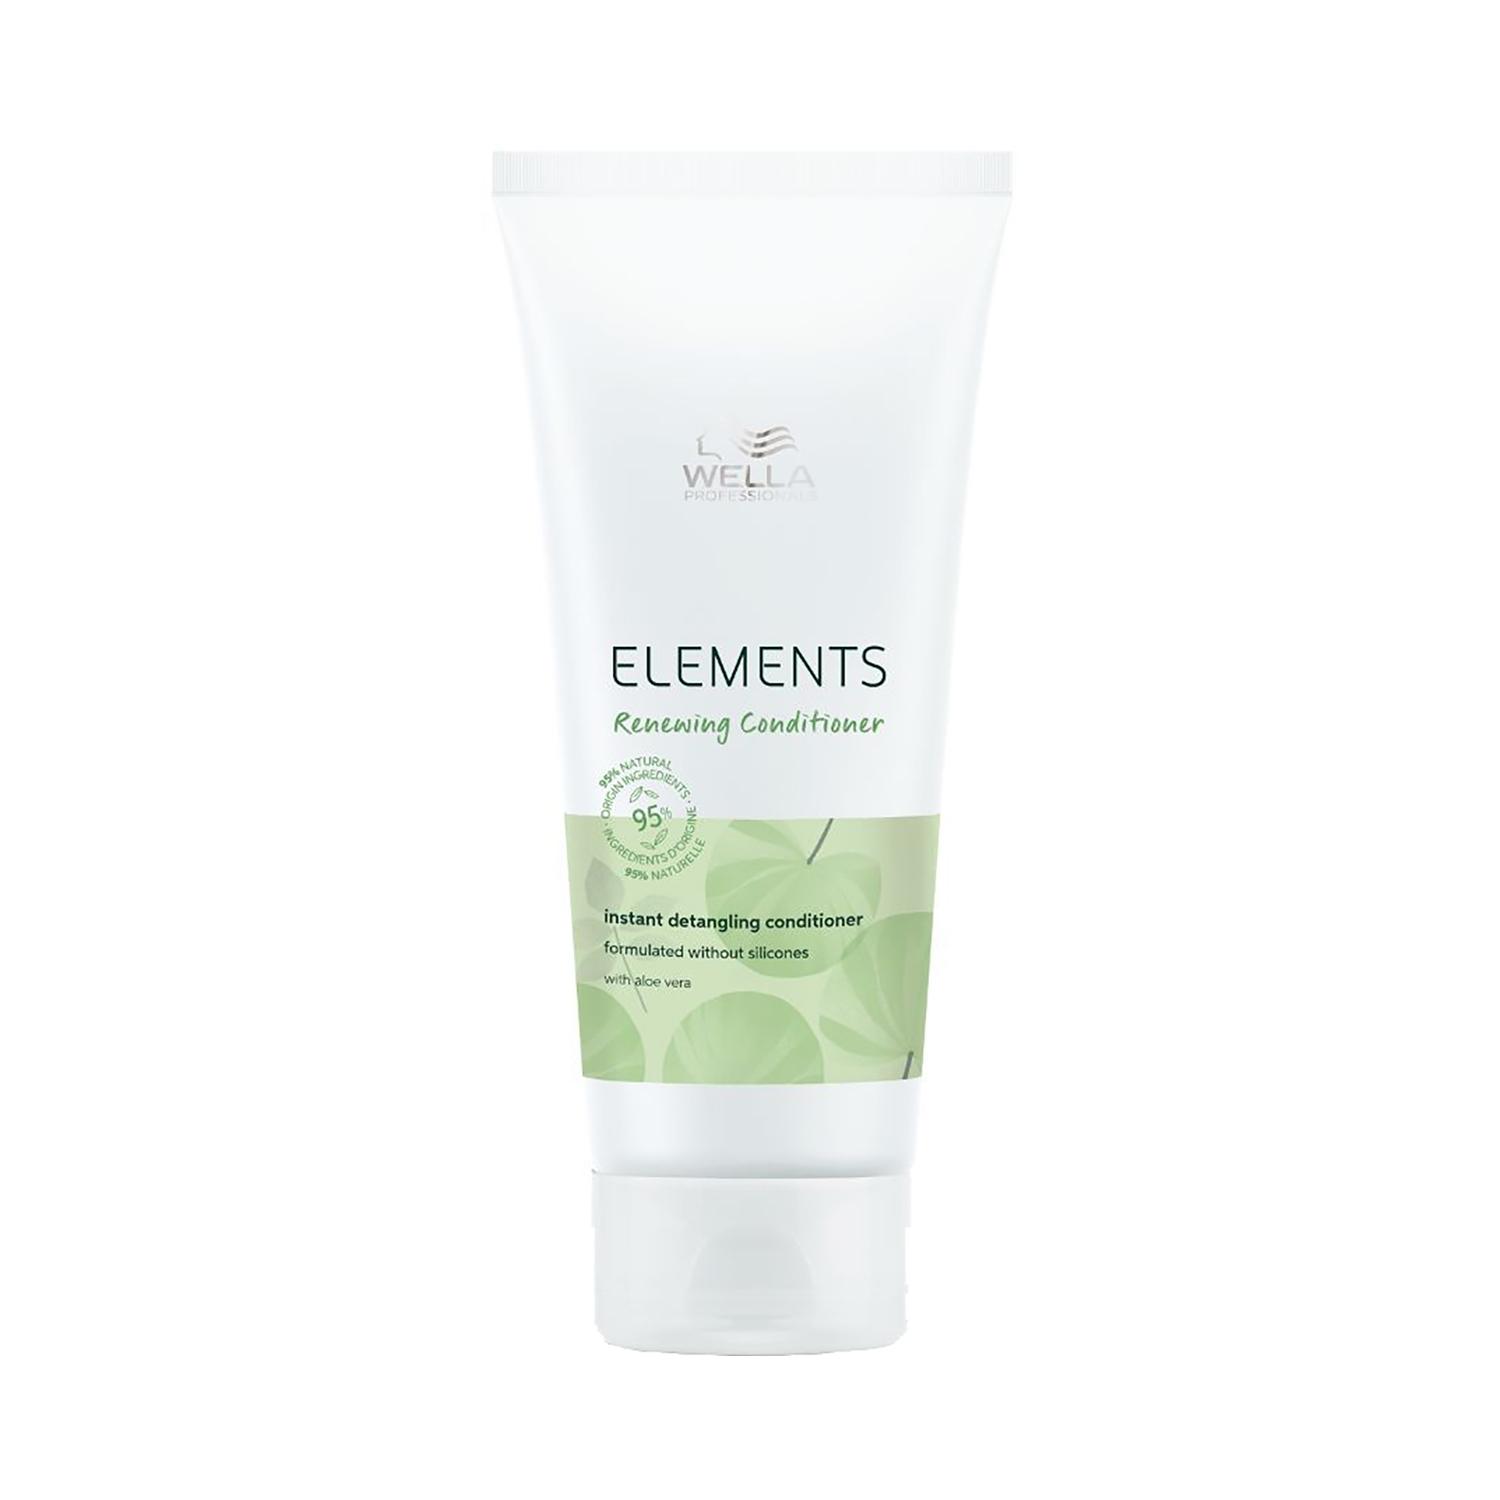 wella professionals elements gentle renewing conditioner instant detangling for all hair types (200ml)